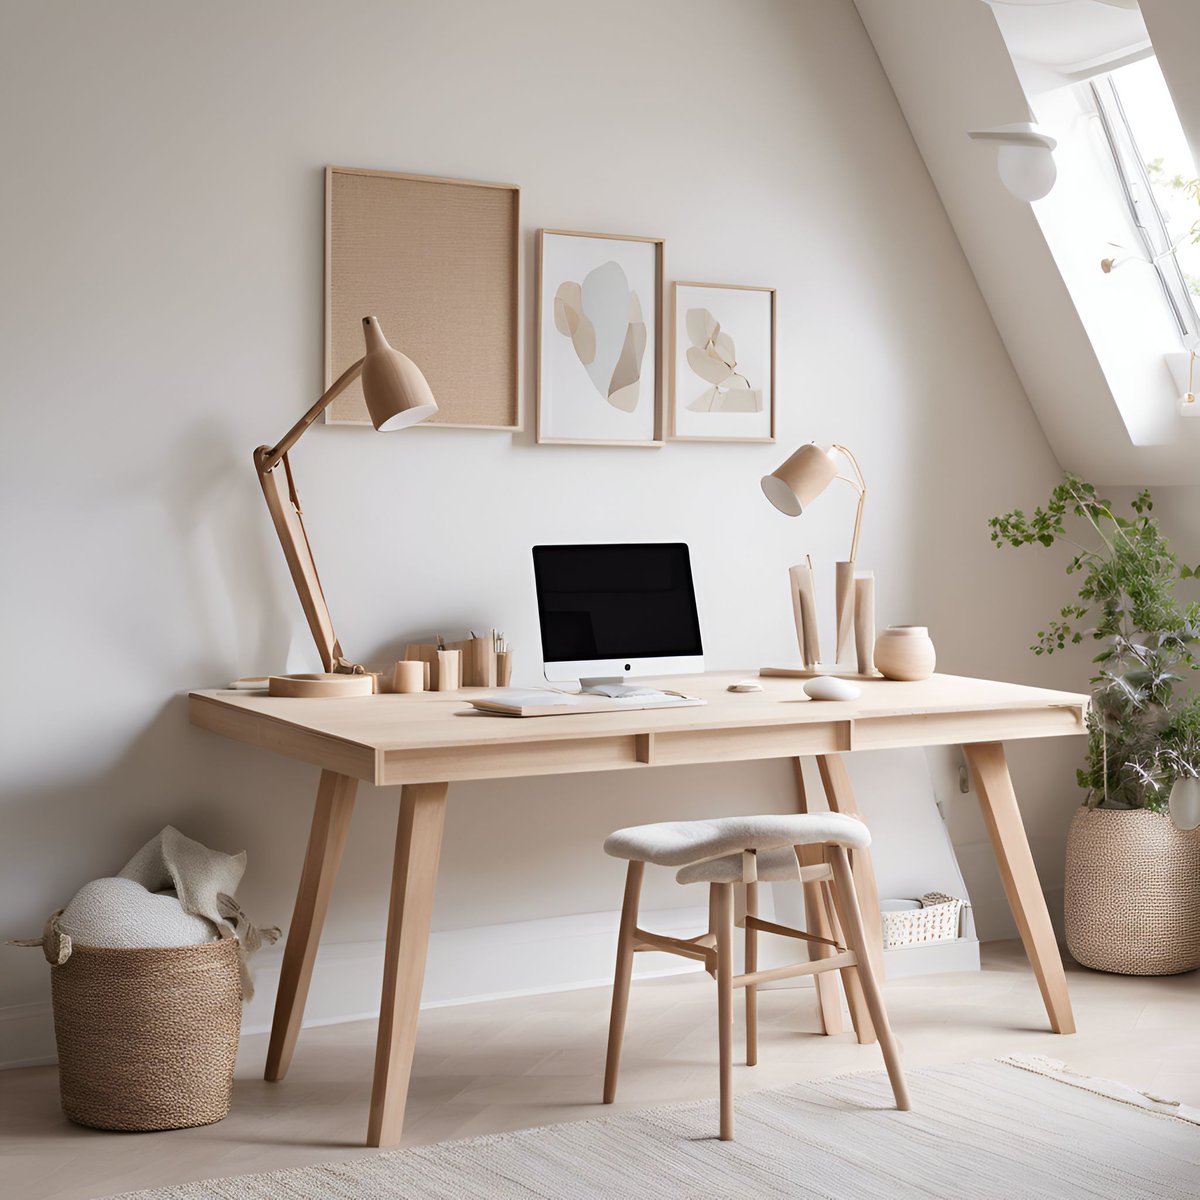 🌟 Transform Your Workspace! Discover the calmness of Scandinavian design. 🍃🏢

Check it out 👉 ai4spaces.com

#ScandiStyle #AIHomeDesign #WorkspaceWellness #ScandinavianDesign #OfficeMakeover #AIInteriorDesign #SerenityAtWork #InteriorDesign #HomeDesign #Inspiration